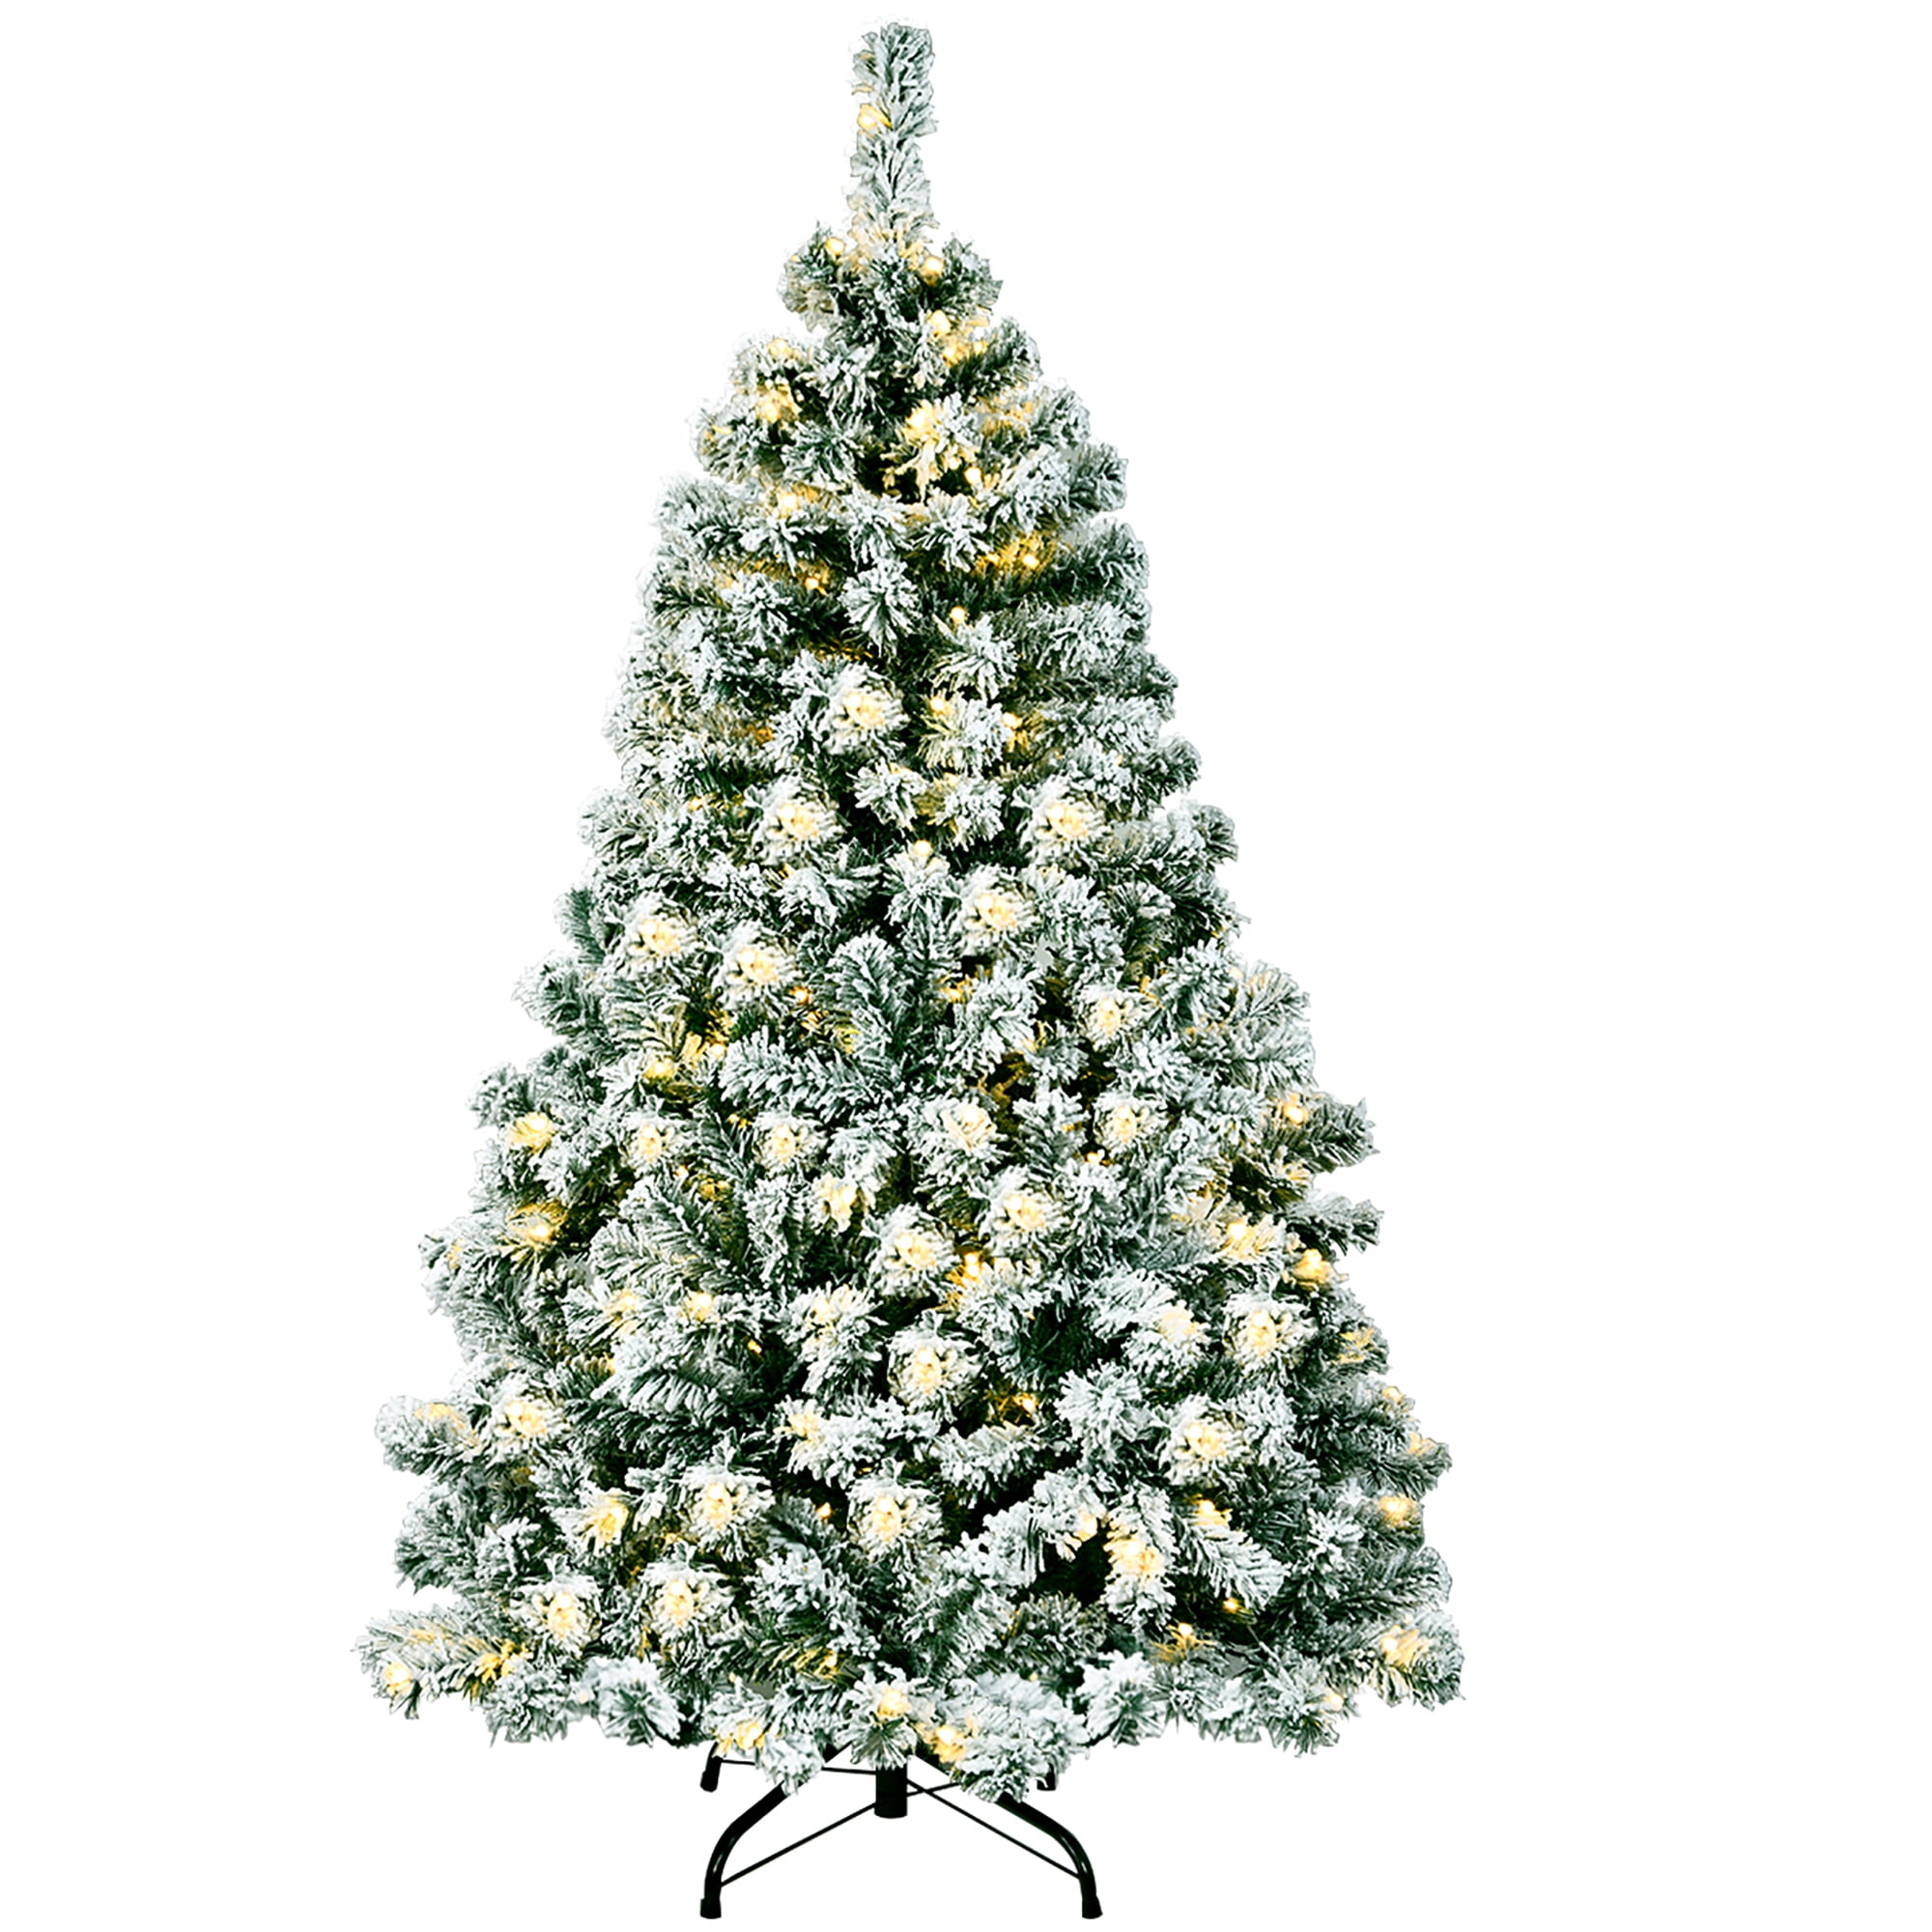 Artificial Christmas Tree 6.5/7/7.5' Full w Clear LED Lights and Base 